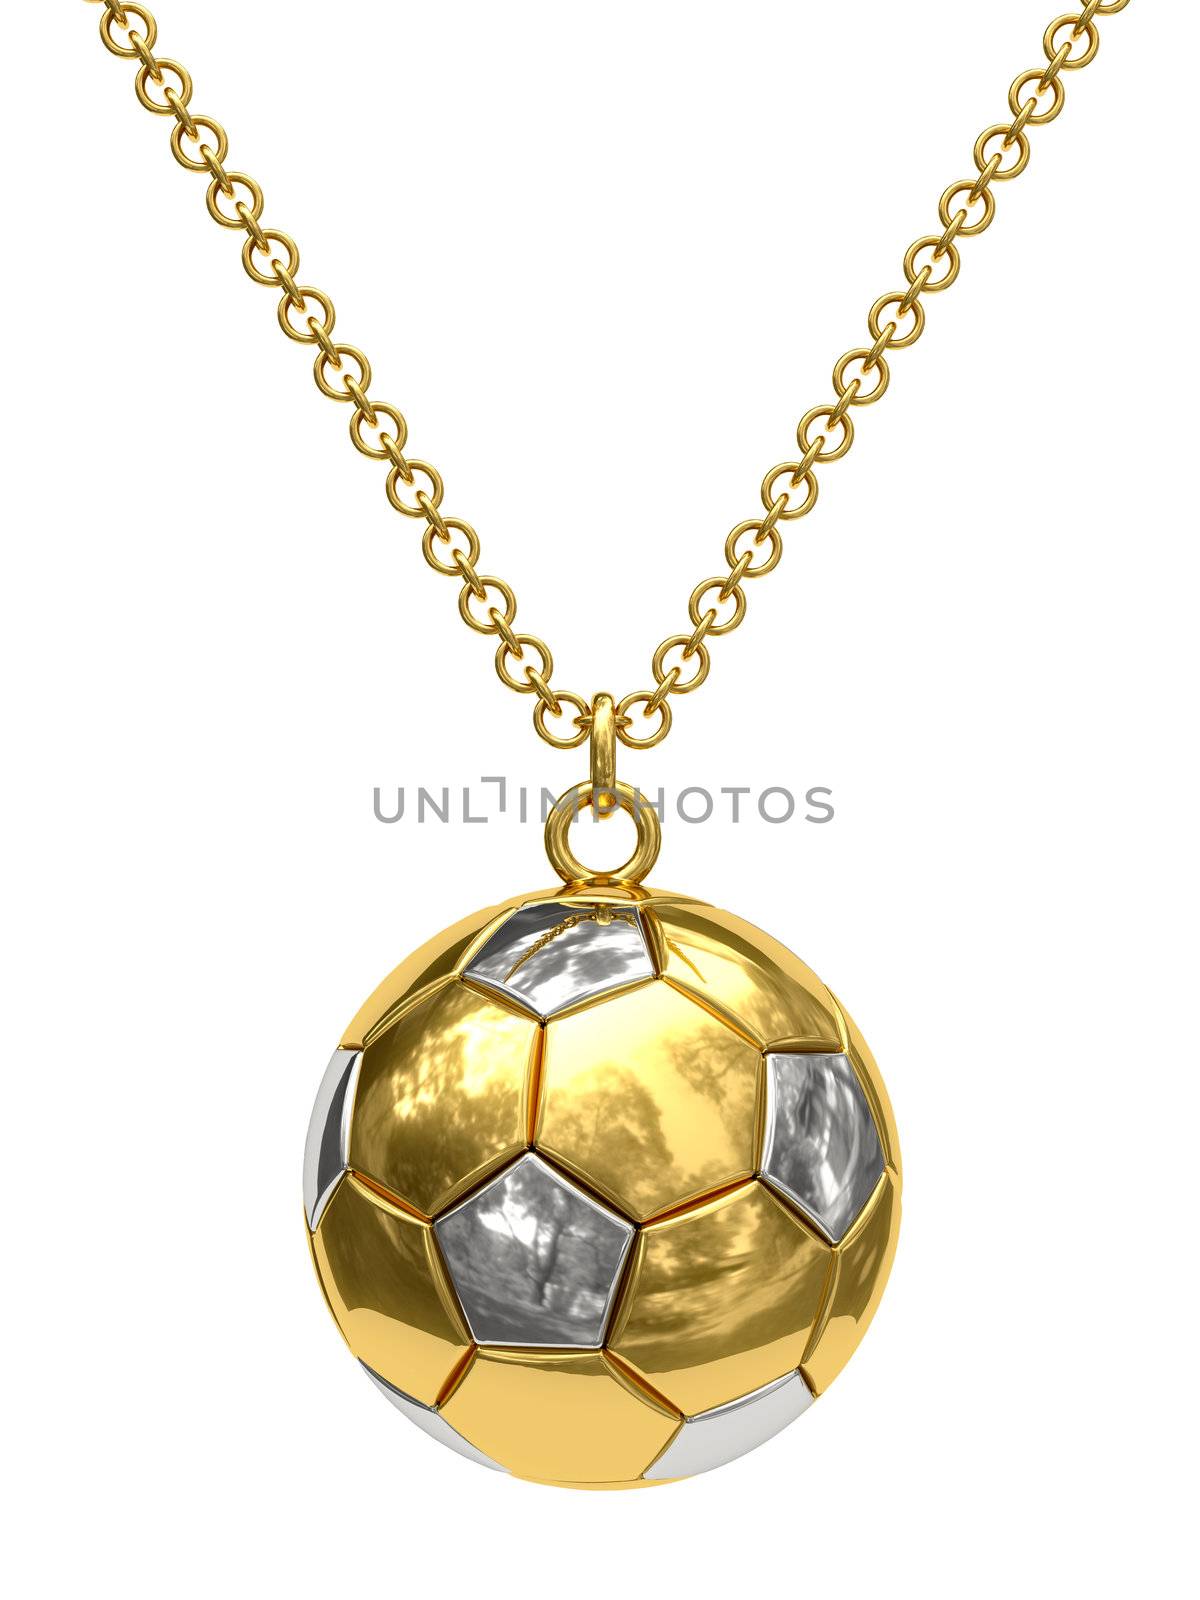 Gold pendant in shape of soccer ball on chain isolated on white. High resolution 3D image